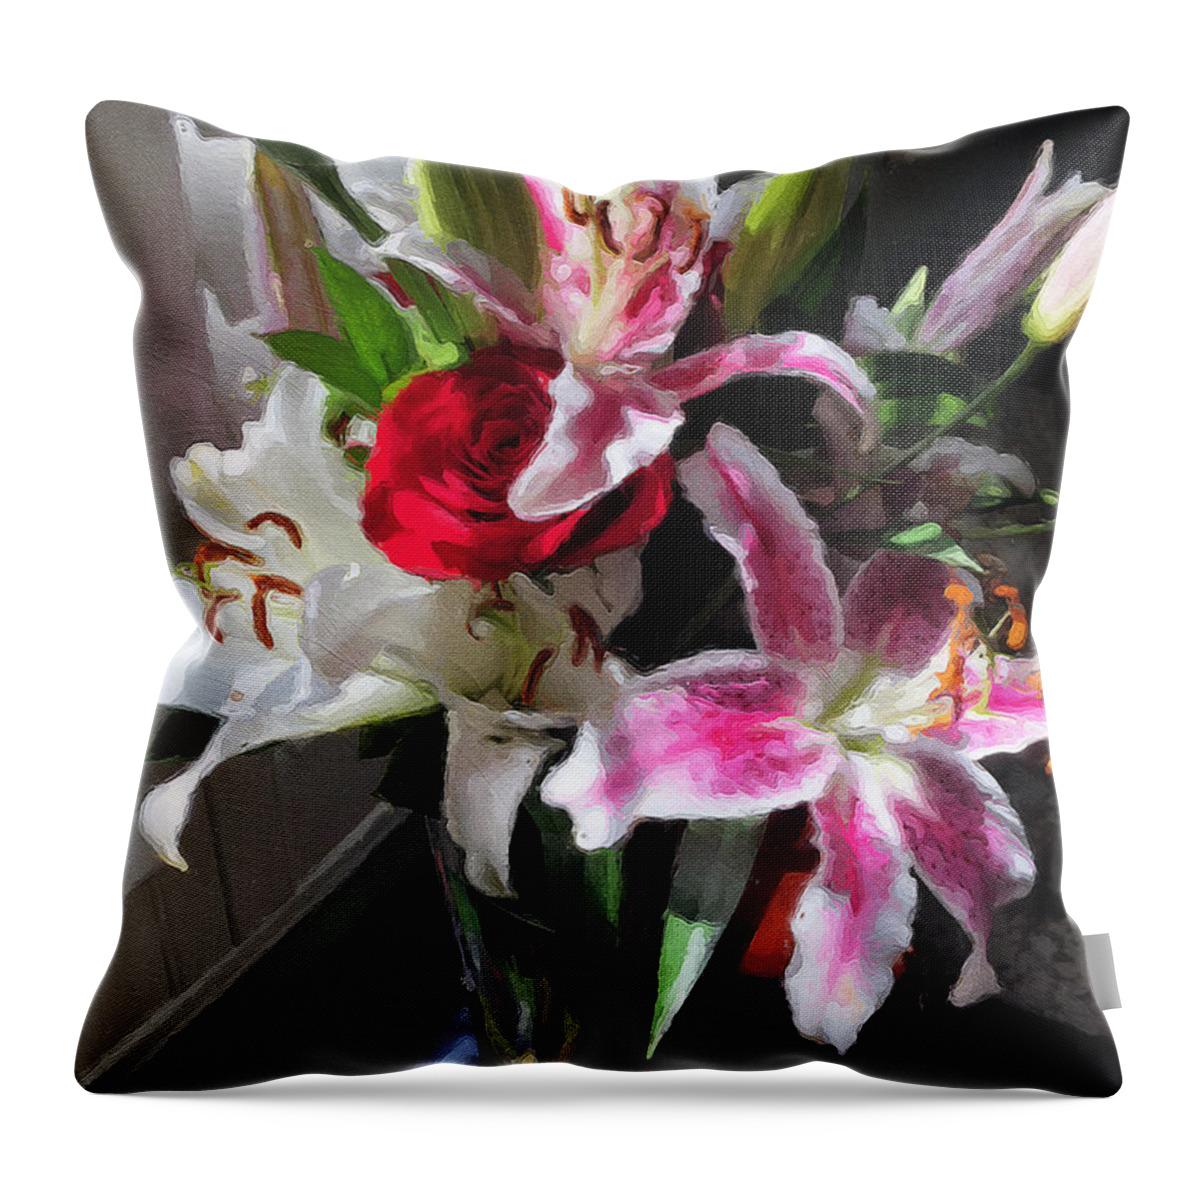 Flowers Throw Pillow featuring the photograph Bursting Forth by Brian Watt